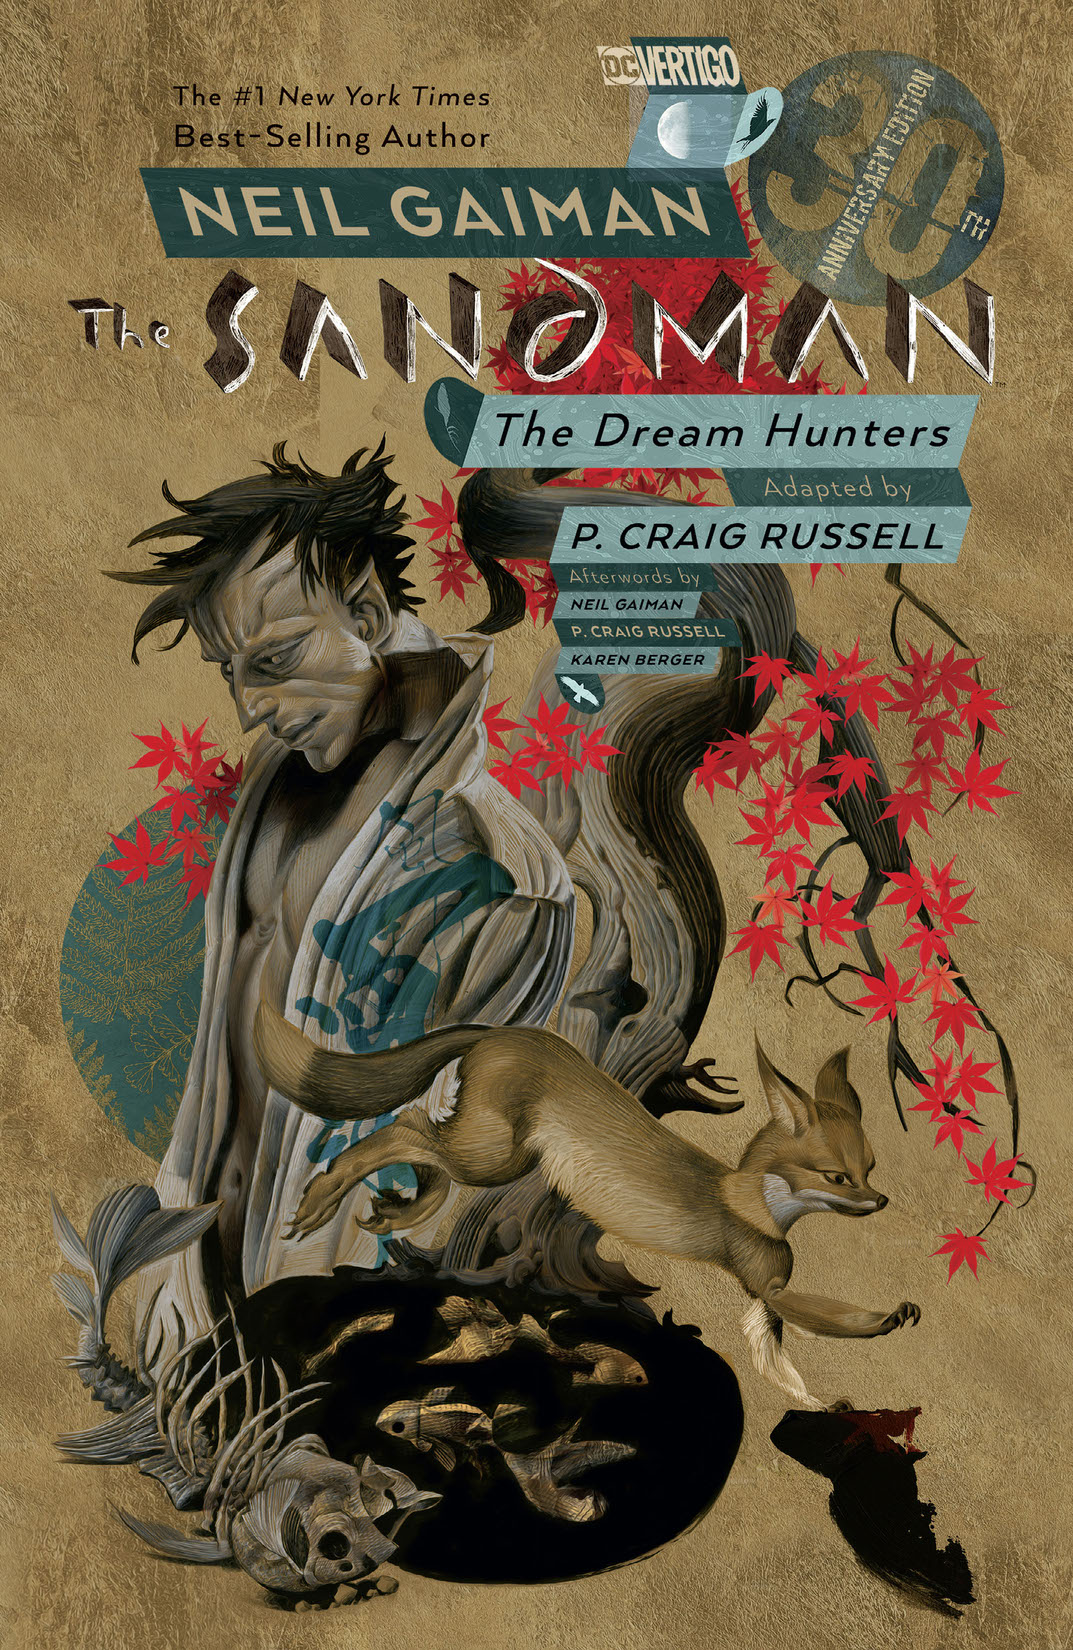 Sandman: Dream Hunters 30th Anniversary Edition (P. Craig Russell) preview images